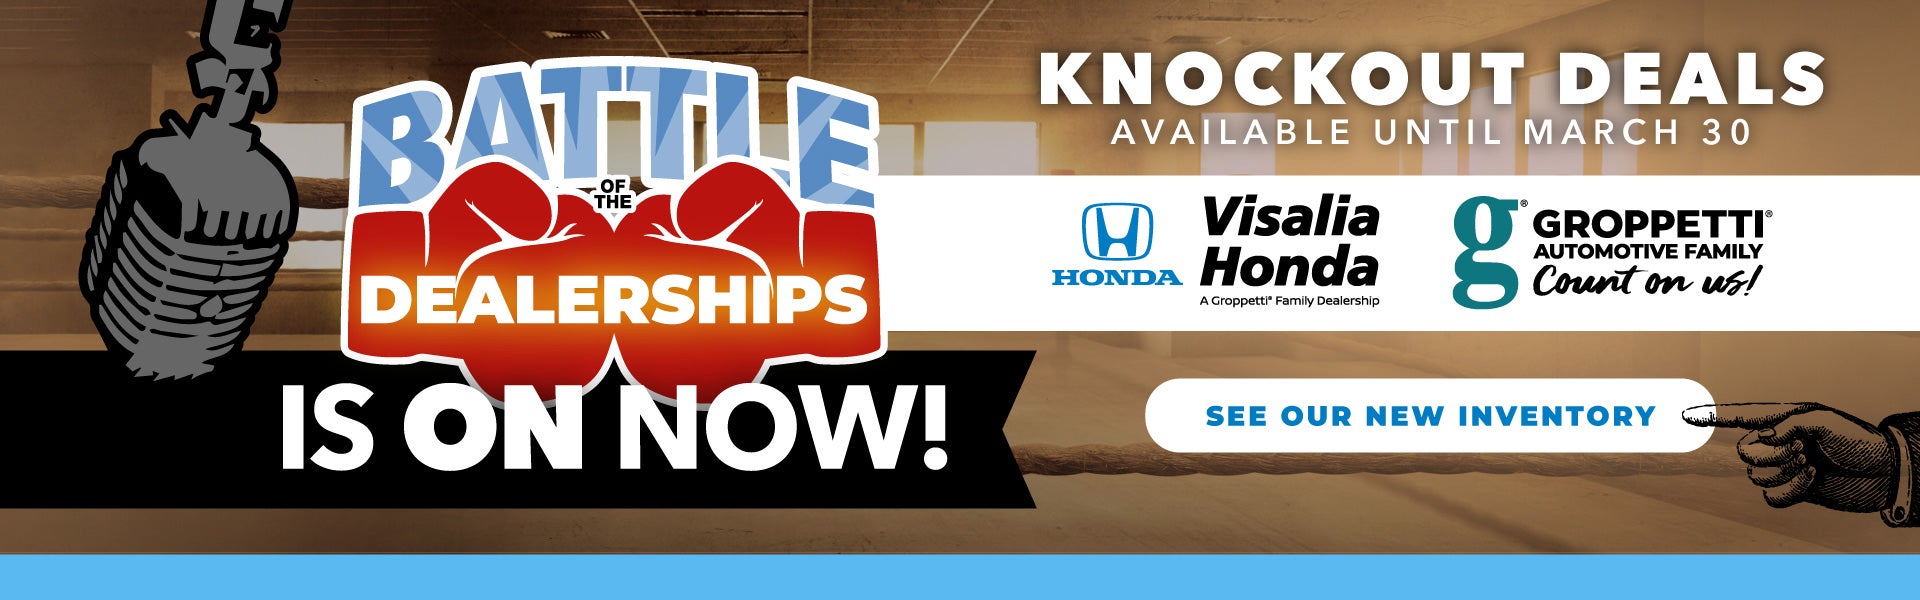 Battle of the Dealerships is ON NOW! Only at Visalia Honda!